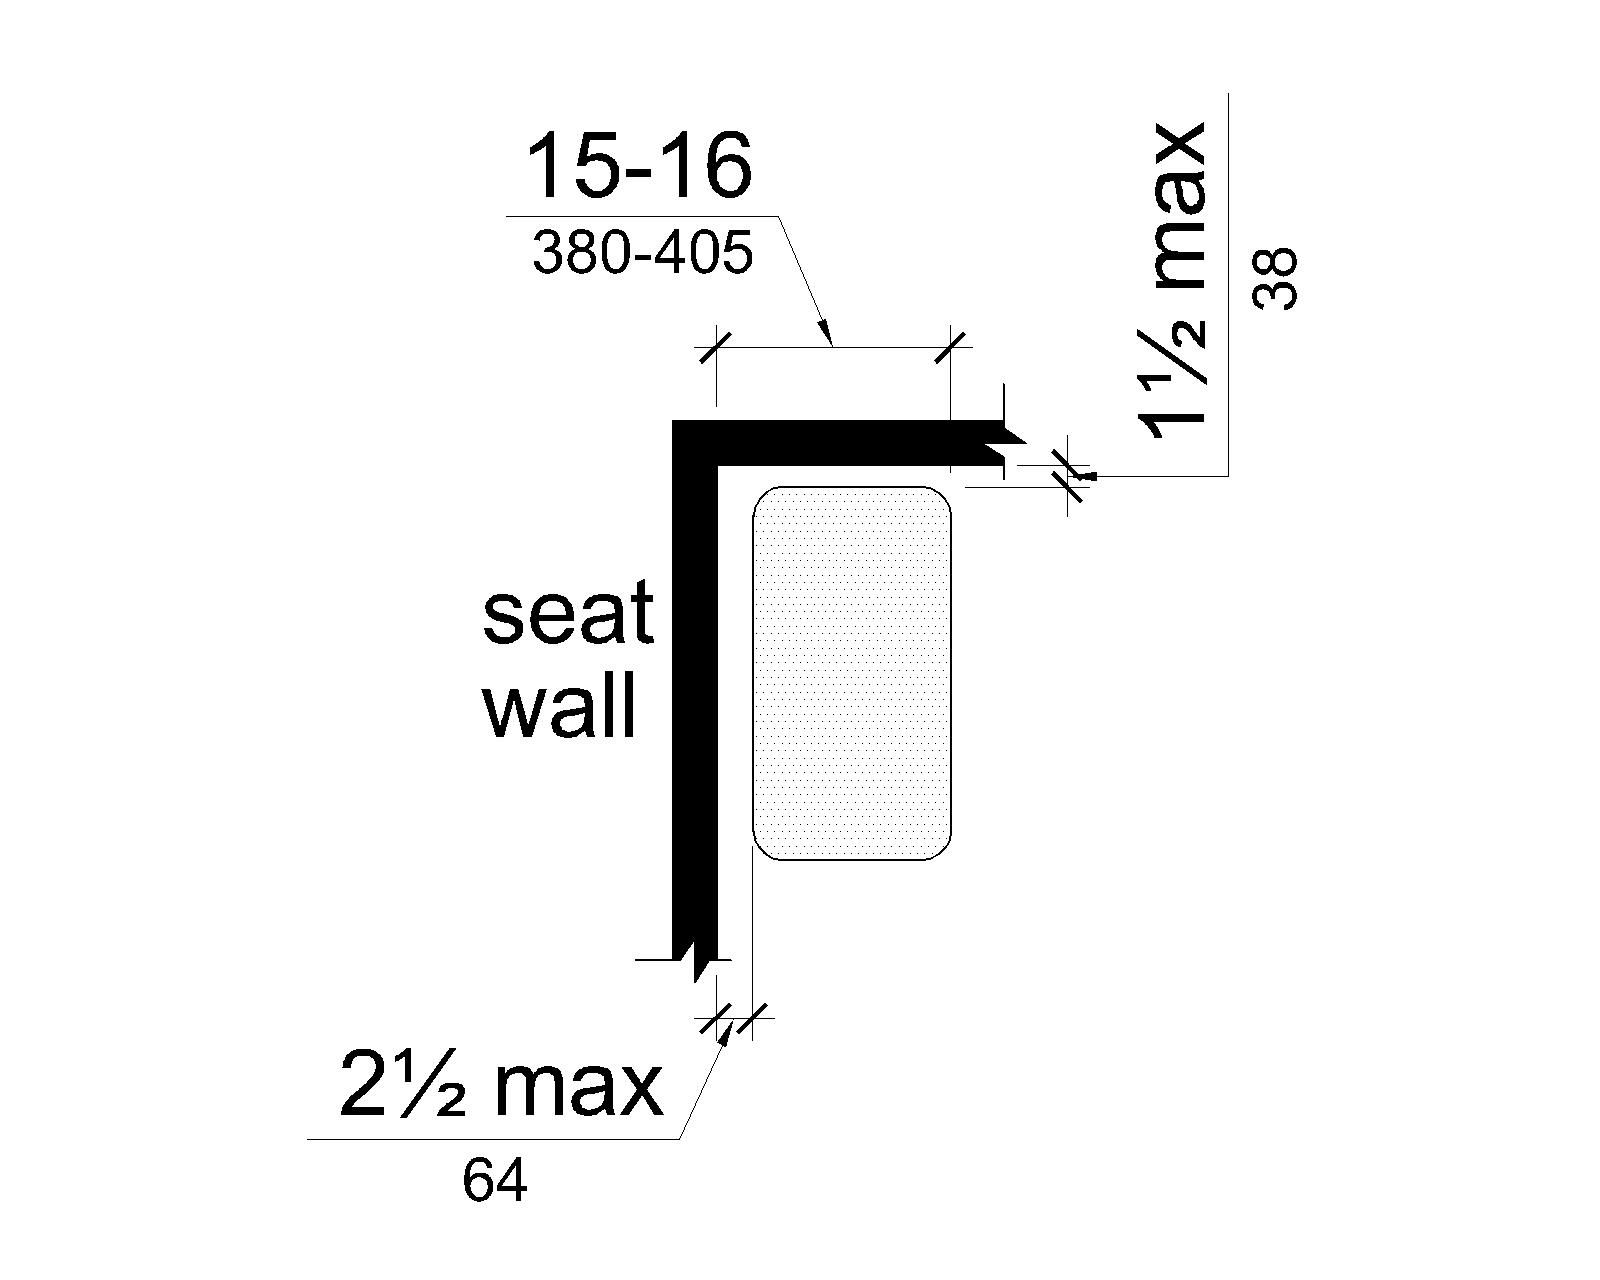 The rear edge is 2½ inches (64 mm) maximum and the front edge 15 to 16 inches (380 to 405 mm) from the seat wall. The side edge is 1½ inches (38 mm) maximum from the back wall.